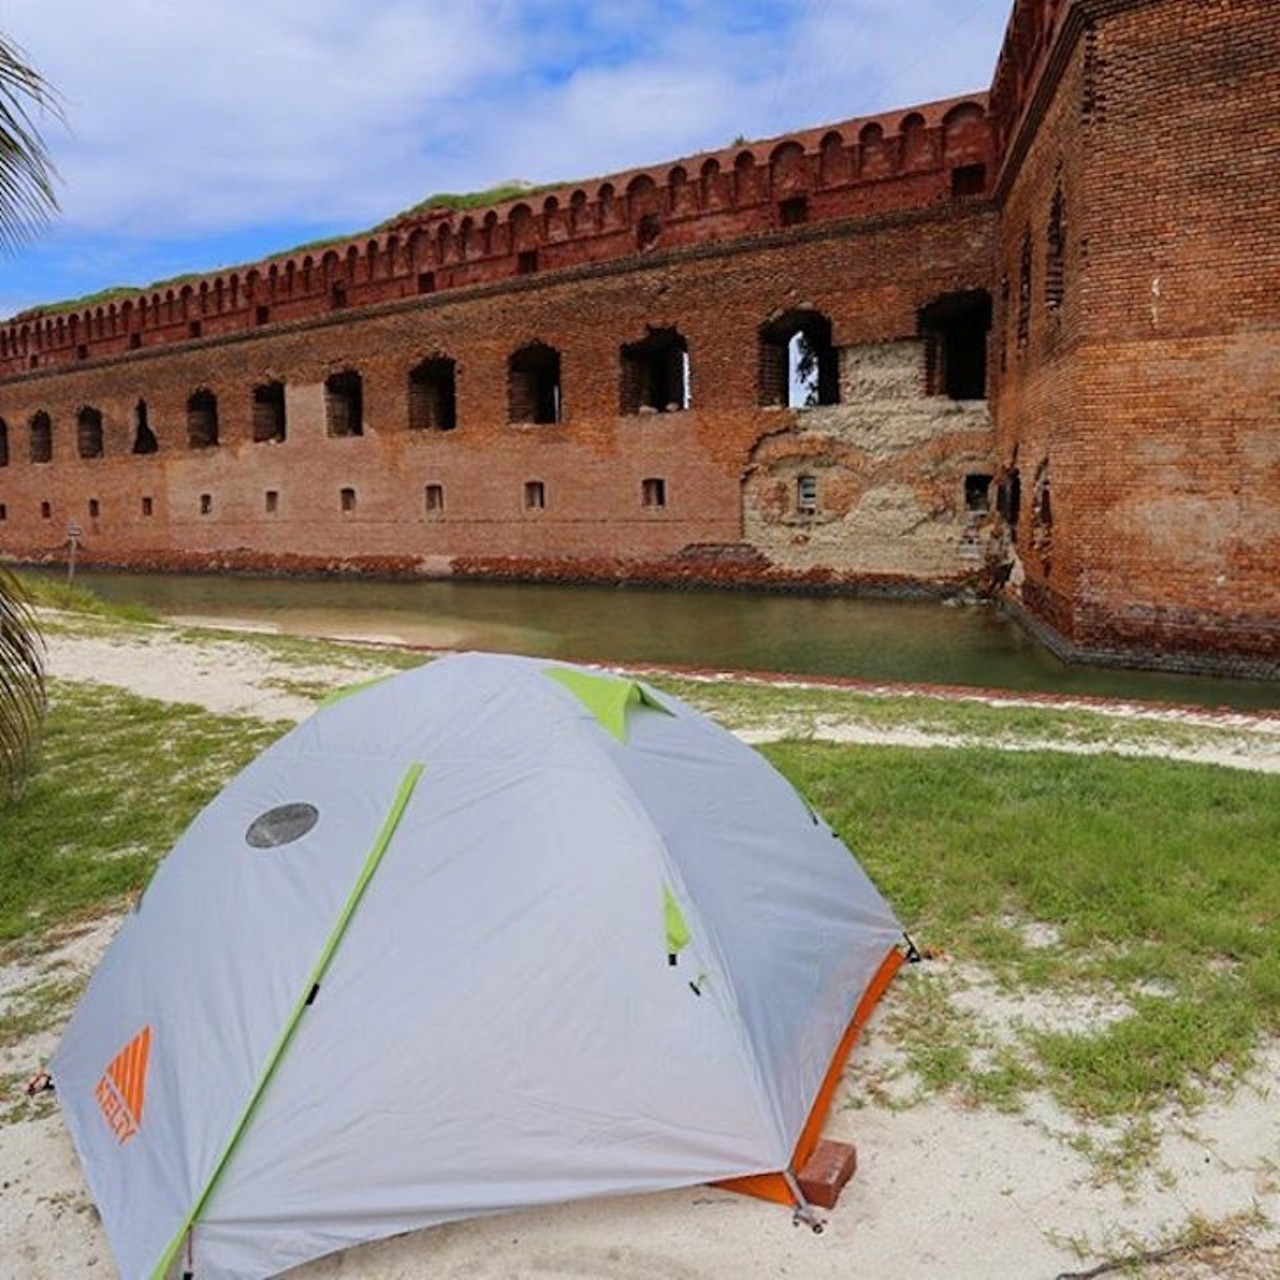 Fort Jefferson
Key West, FL 33041 | (305) 242-7700 
Grab a ferry and travel into Florida&#146;s past-- Fort Jefferson, which served as a federal prison during the Civil War. Unlike many forts, you can actually camp here, so pitch a tent &#145;cause you&#146;ll want to soak in the royal blue water here with as much snorkeling as possible. 
Photo via danielericmadrigal/Instagram